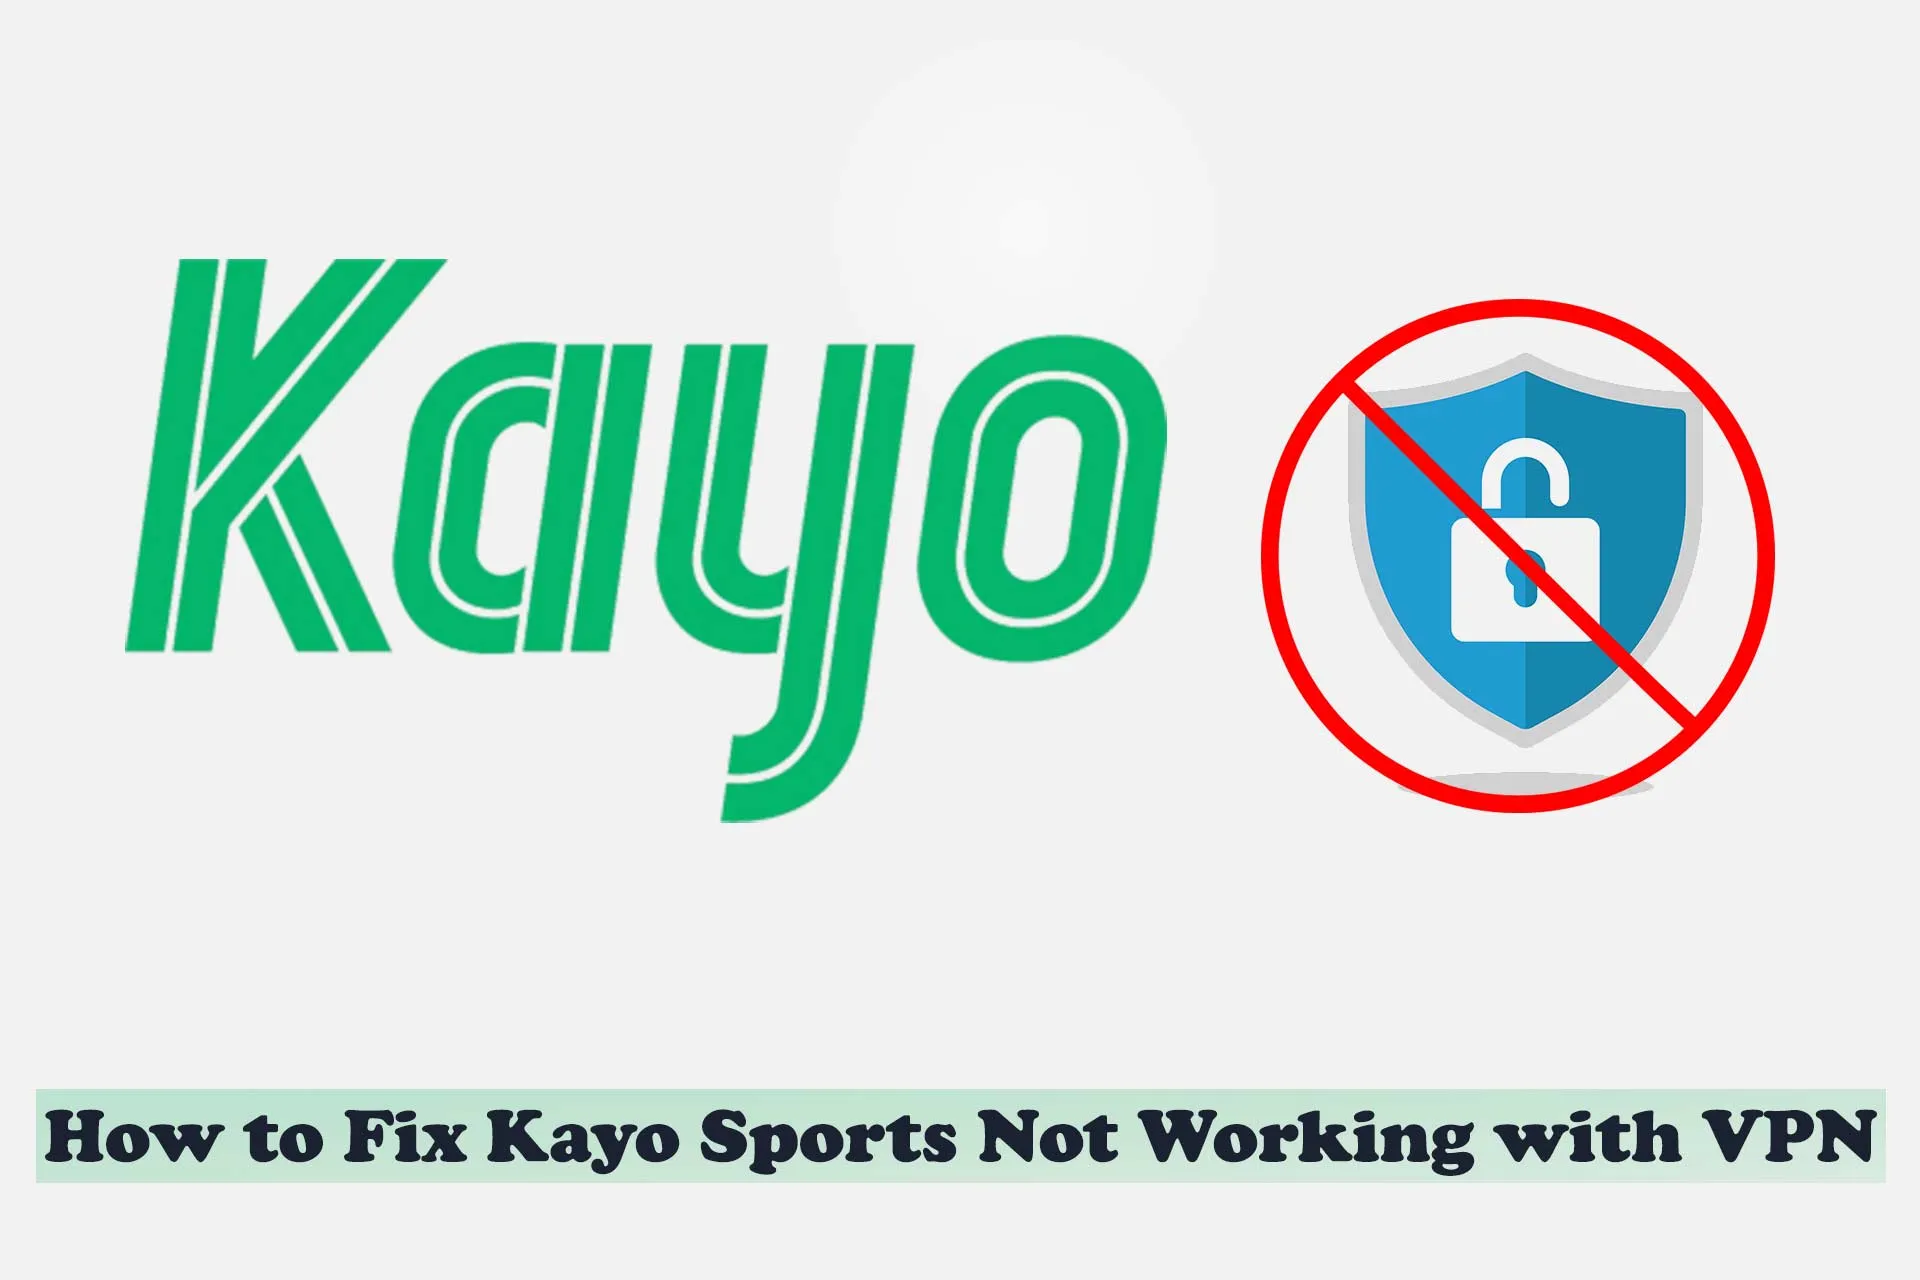 How to Fix Kayo Sports Not Working with VPN